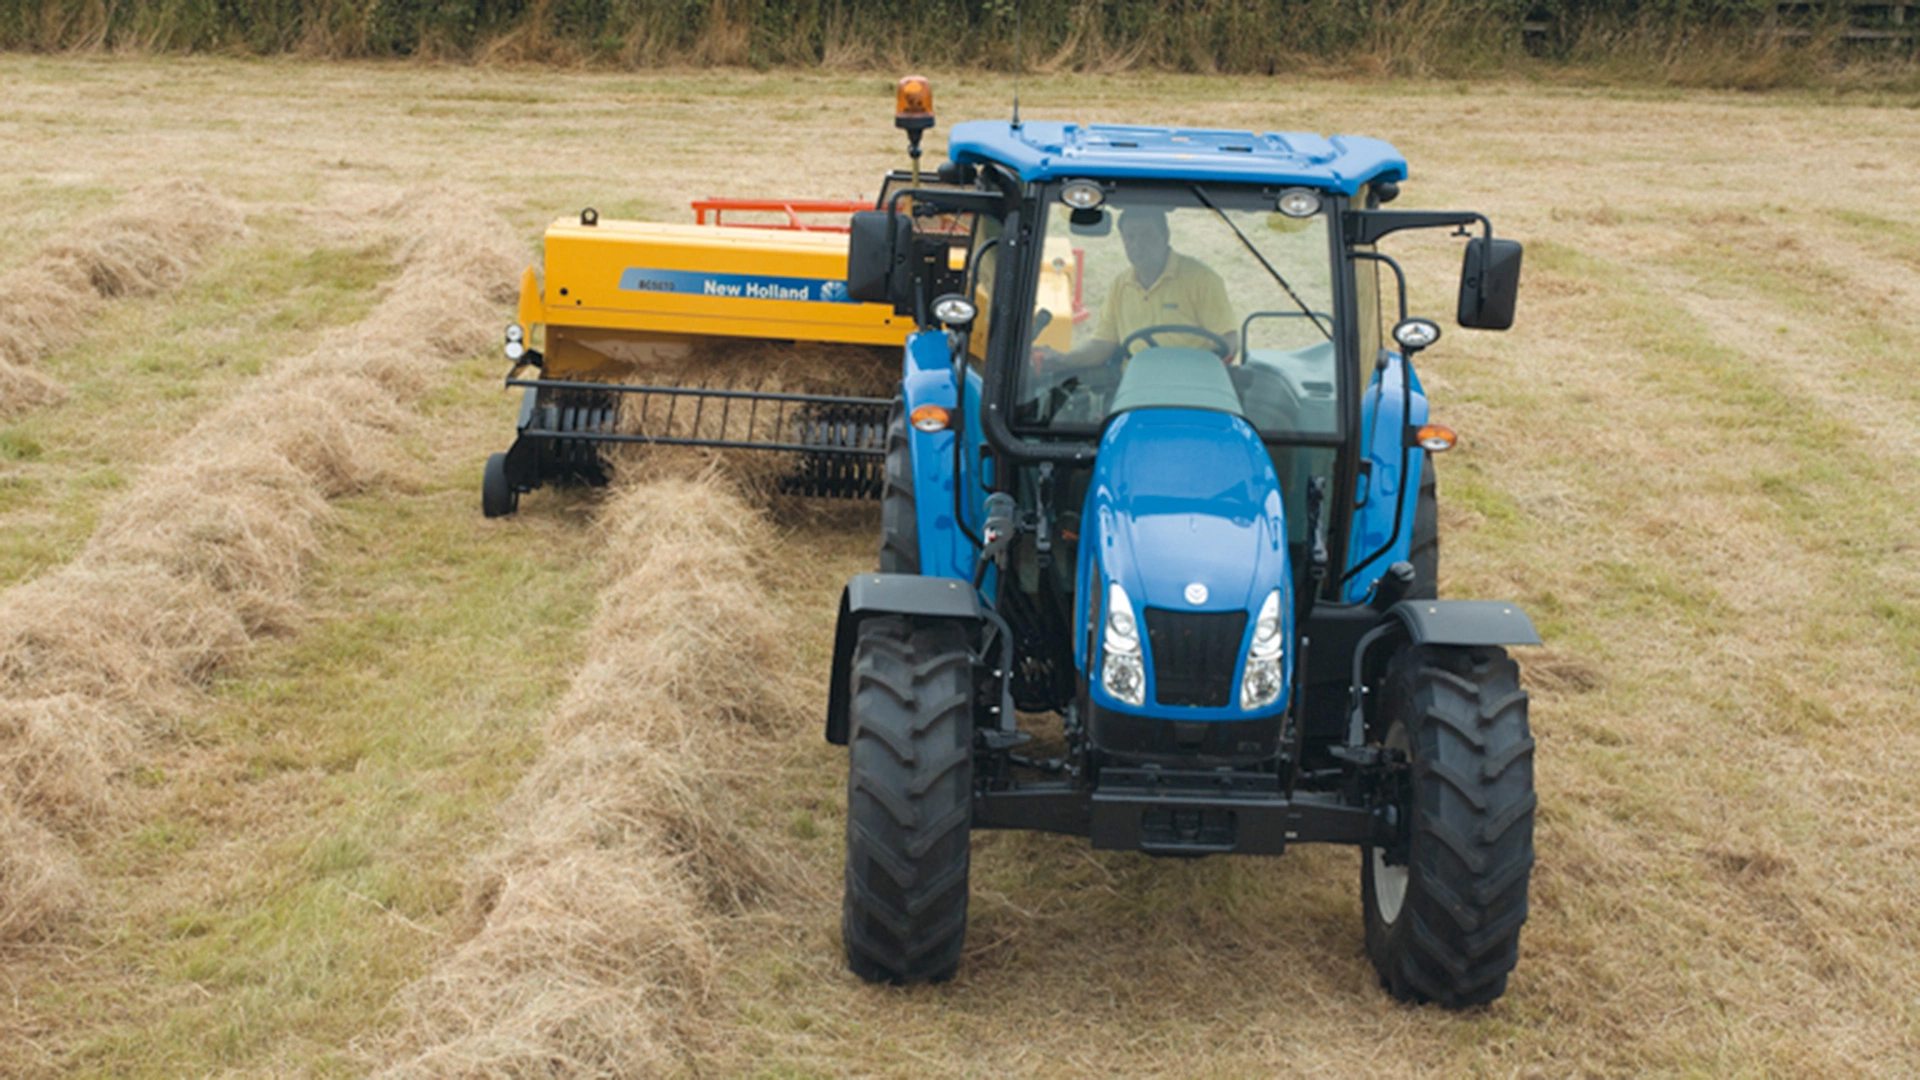 New Holland Tractor with BC5000 baler on the field